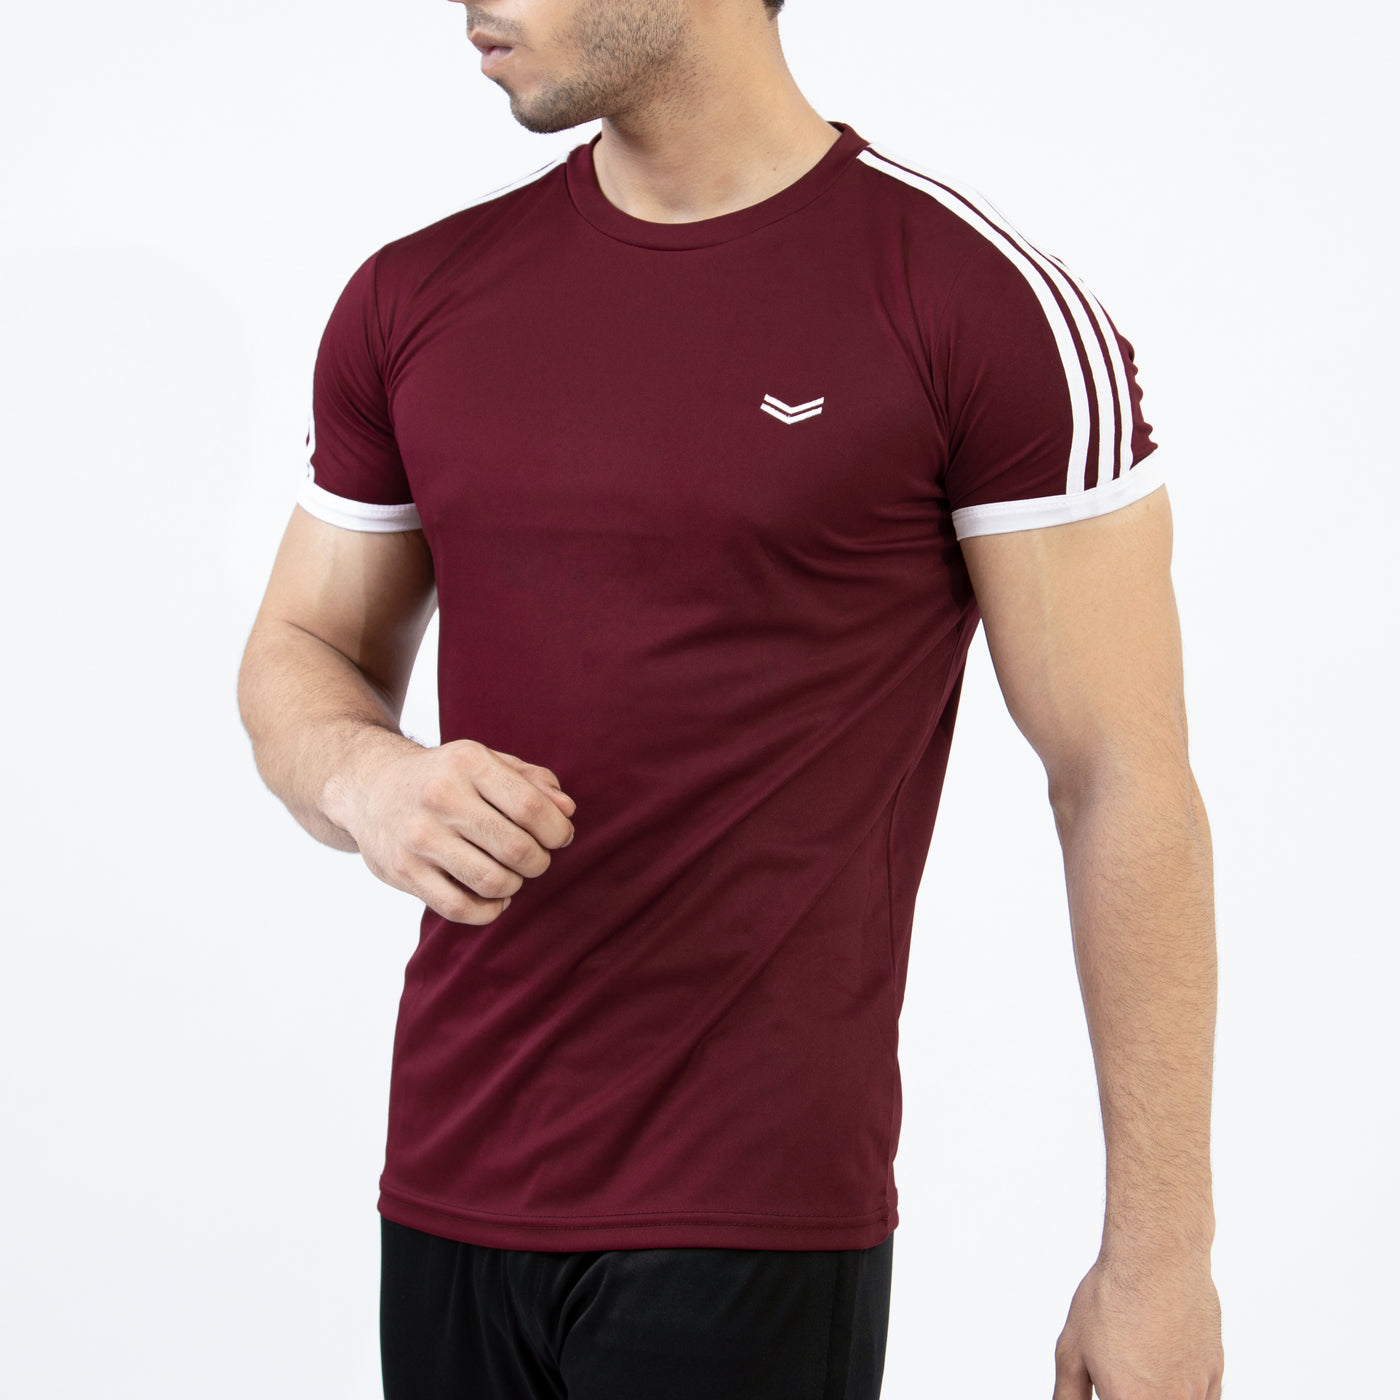 Maroon Quick Dry Ringer T-Shirt with Three Shoulder Stripes